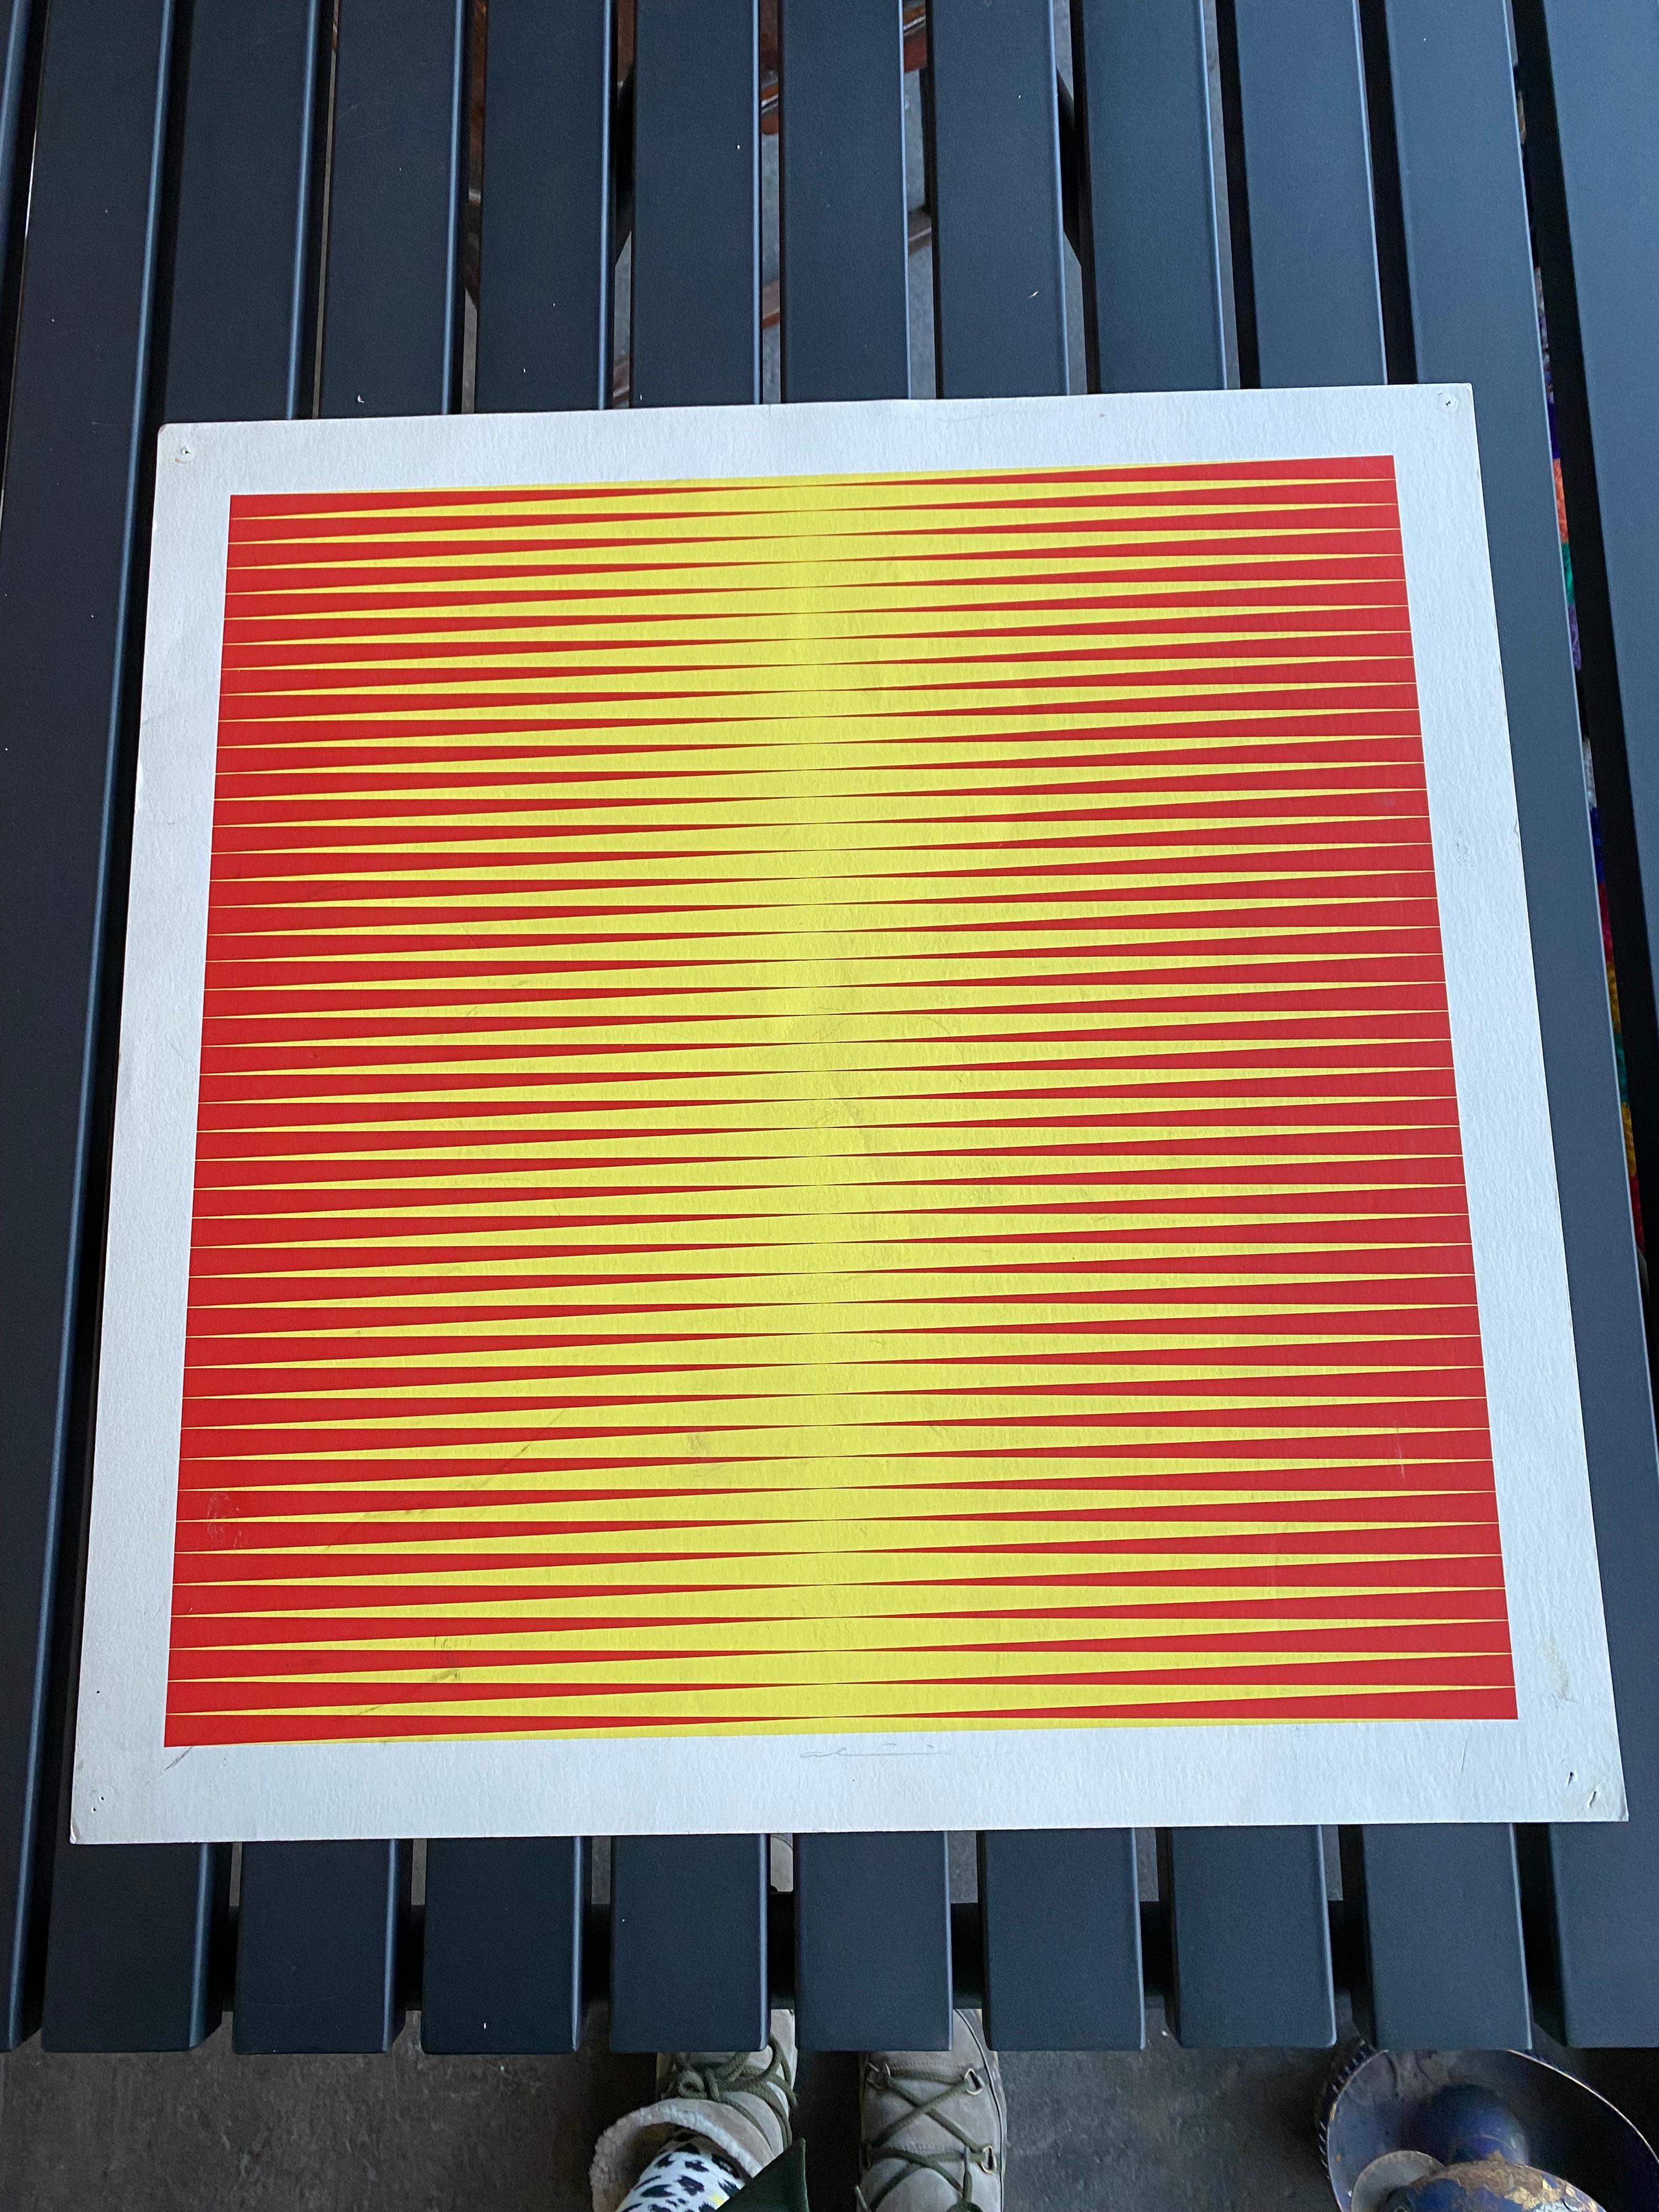 Screenprint  by the Italian Op-Art artist Getulio Alviani.
Getulio Alviani (1939-2018) was an Italian painter, object artist and representative of Op Art or Kinetic Art. He created abstract works both in reduced black-and-white and in a variety of